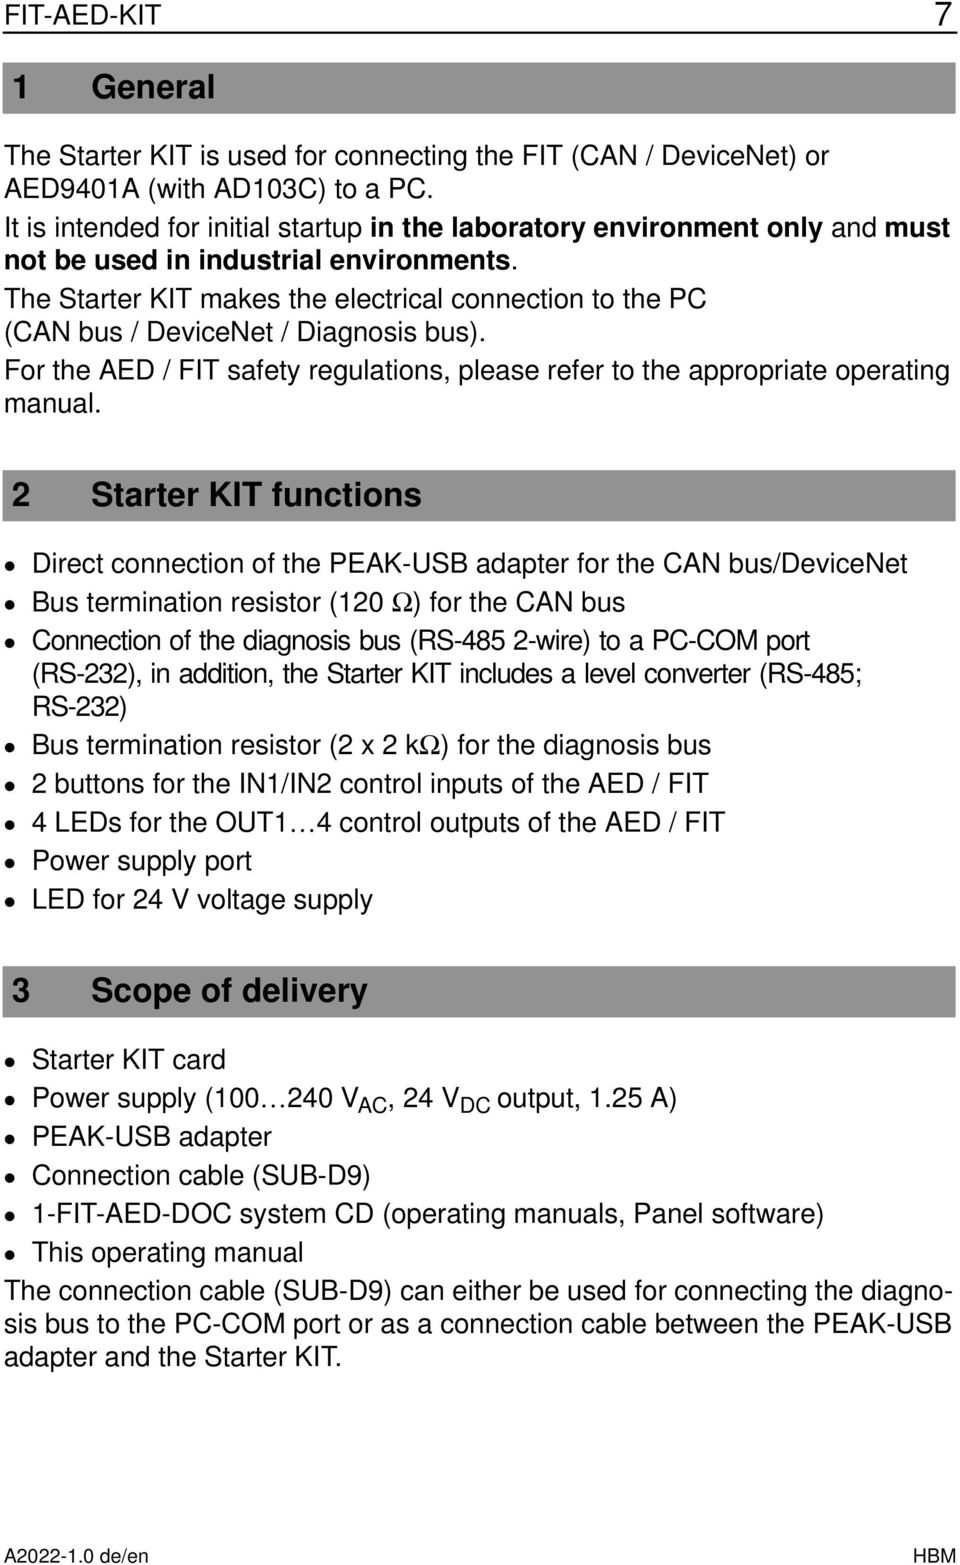 The Starter KIT makes the electrical connection to the PC (CAN bus / evicenet / iagnosis bus). For the AE / safety regulations, please refer to the appropriate operating manual.